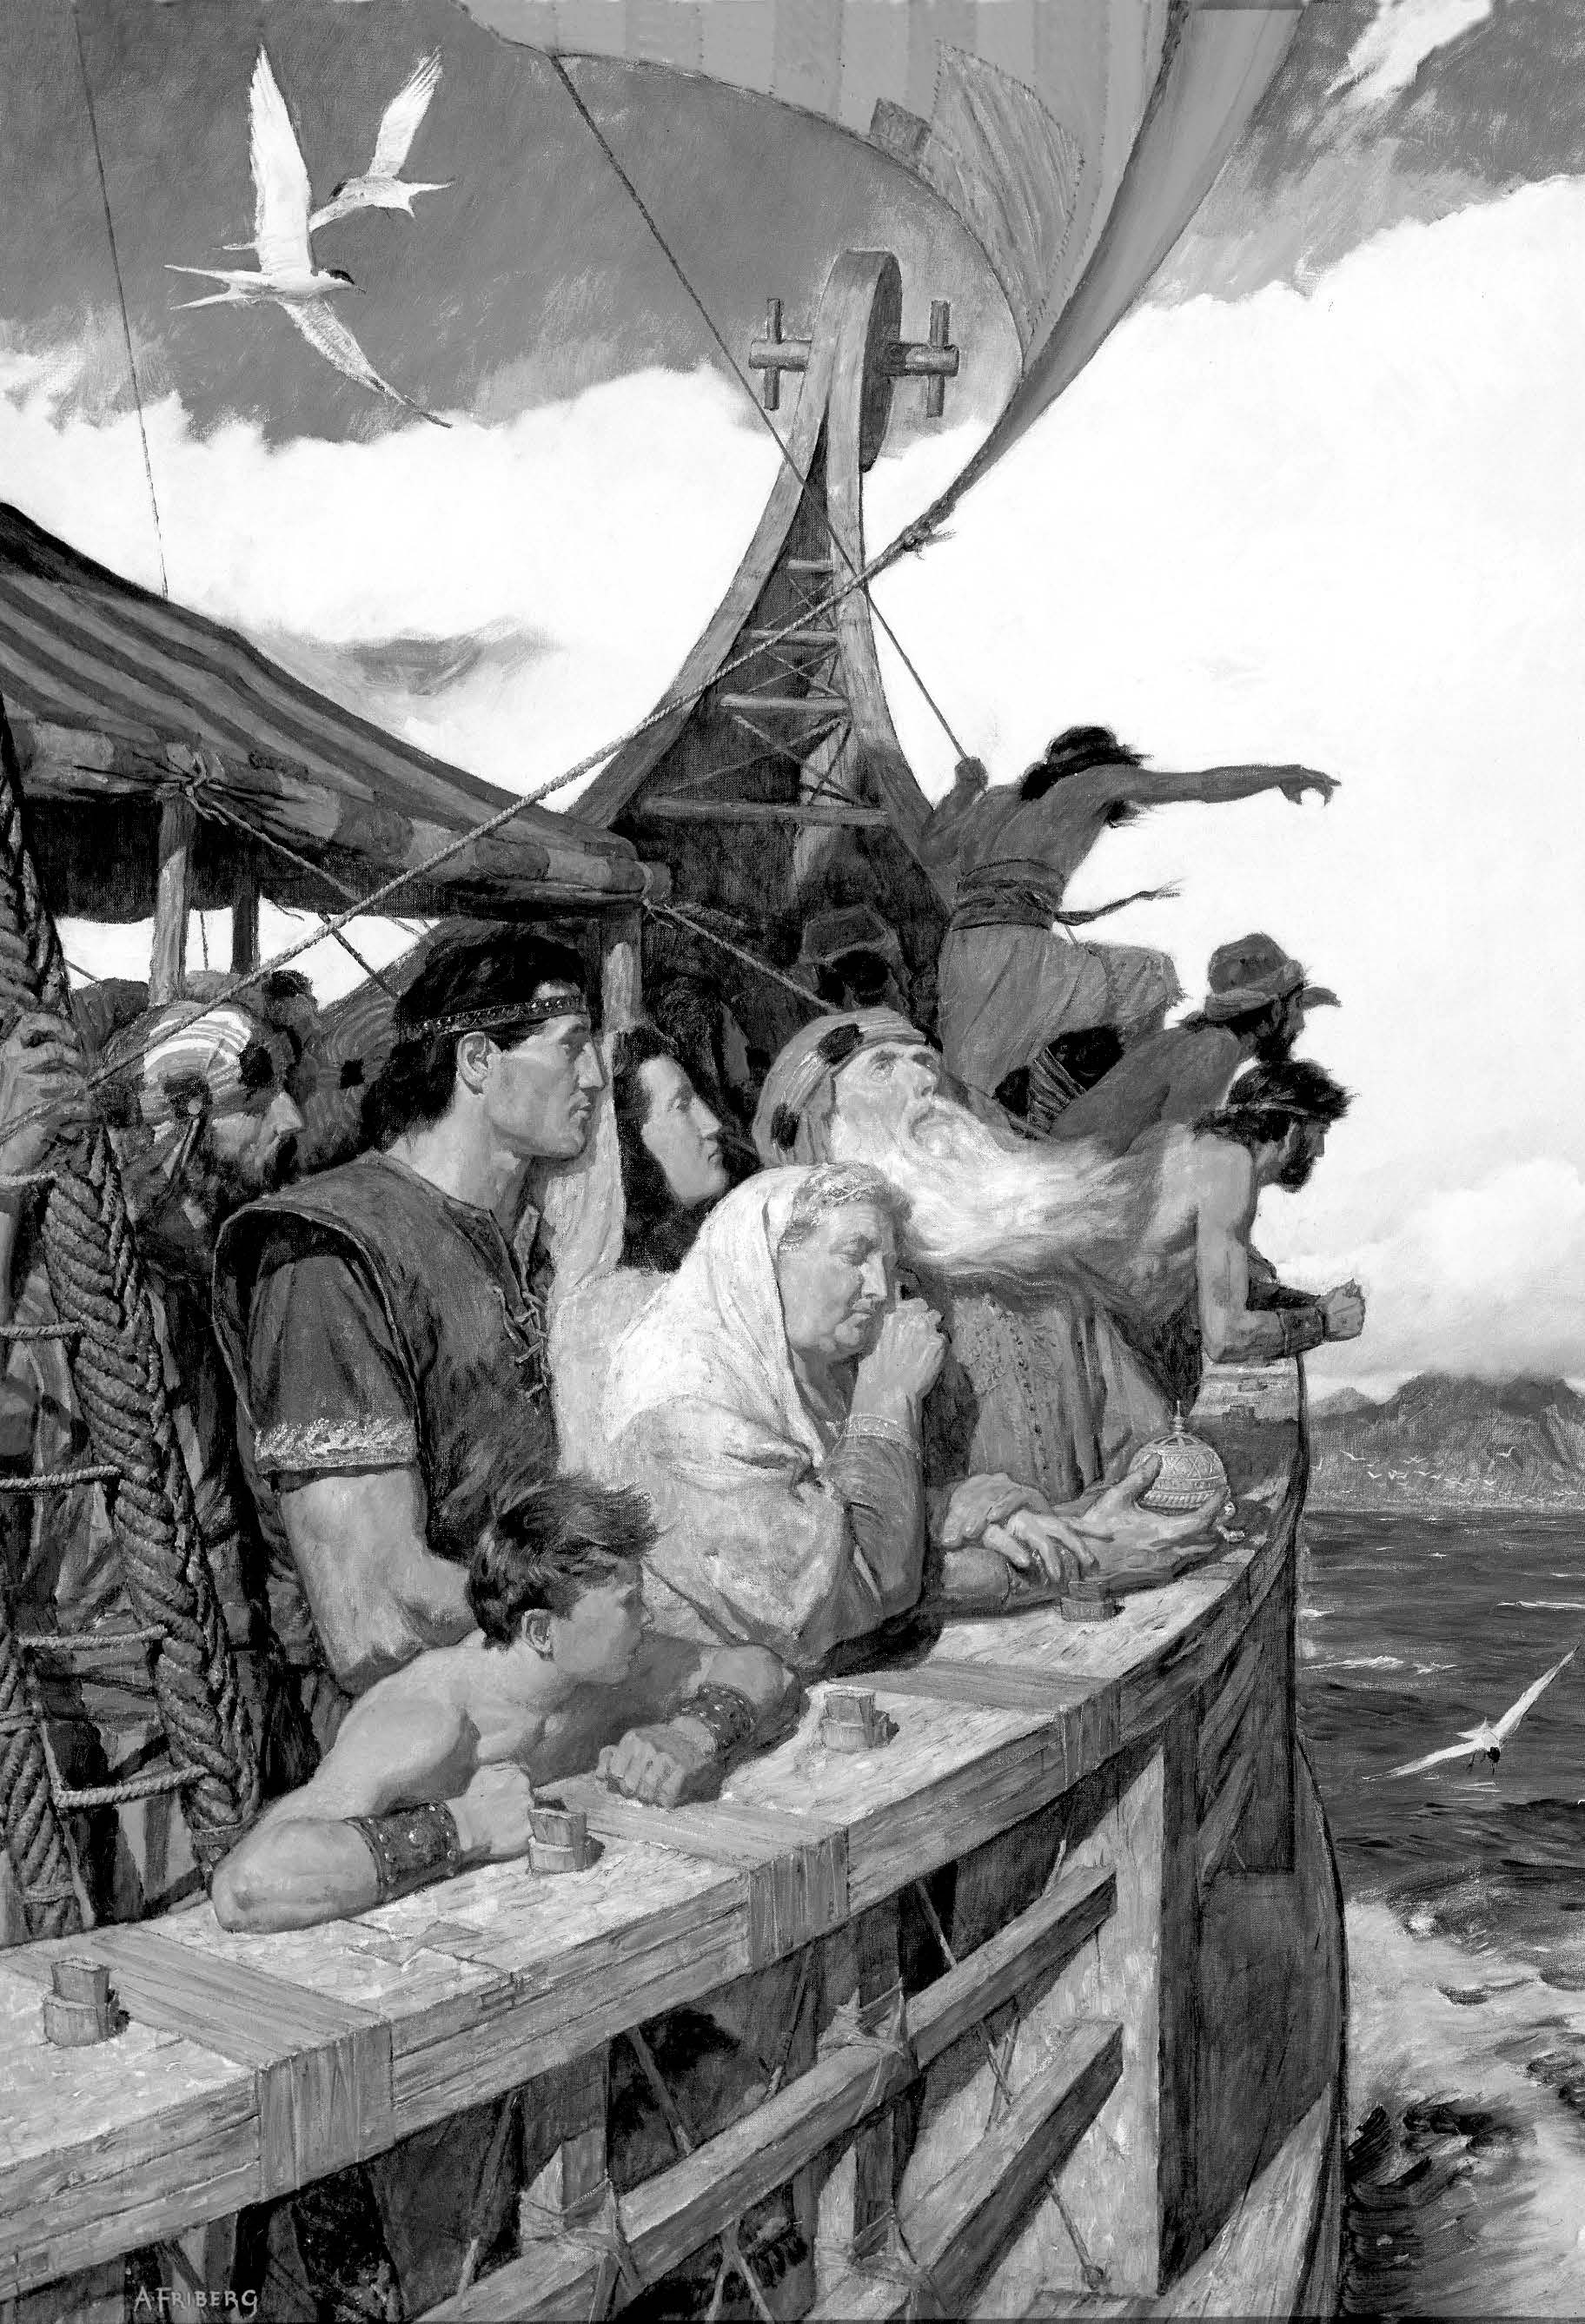 Nephi and his family on a boat